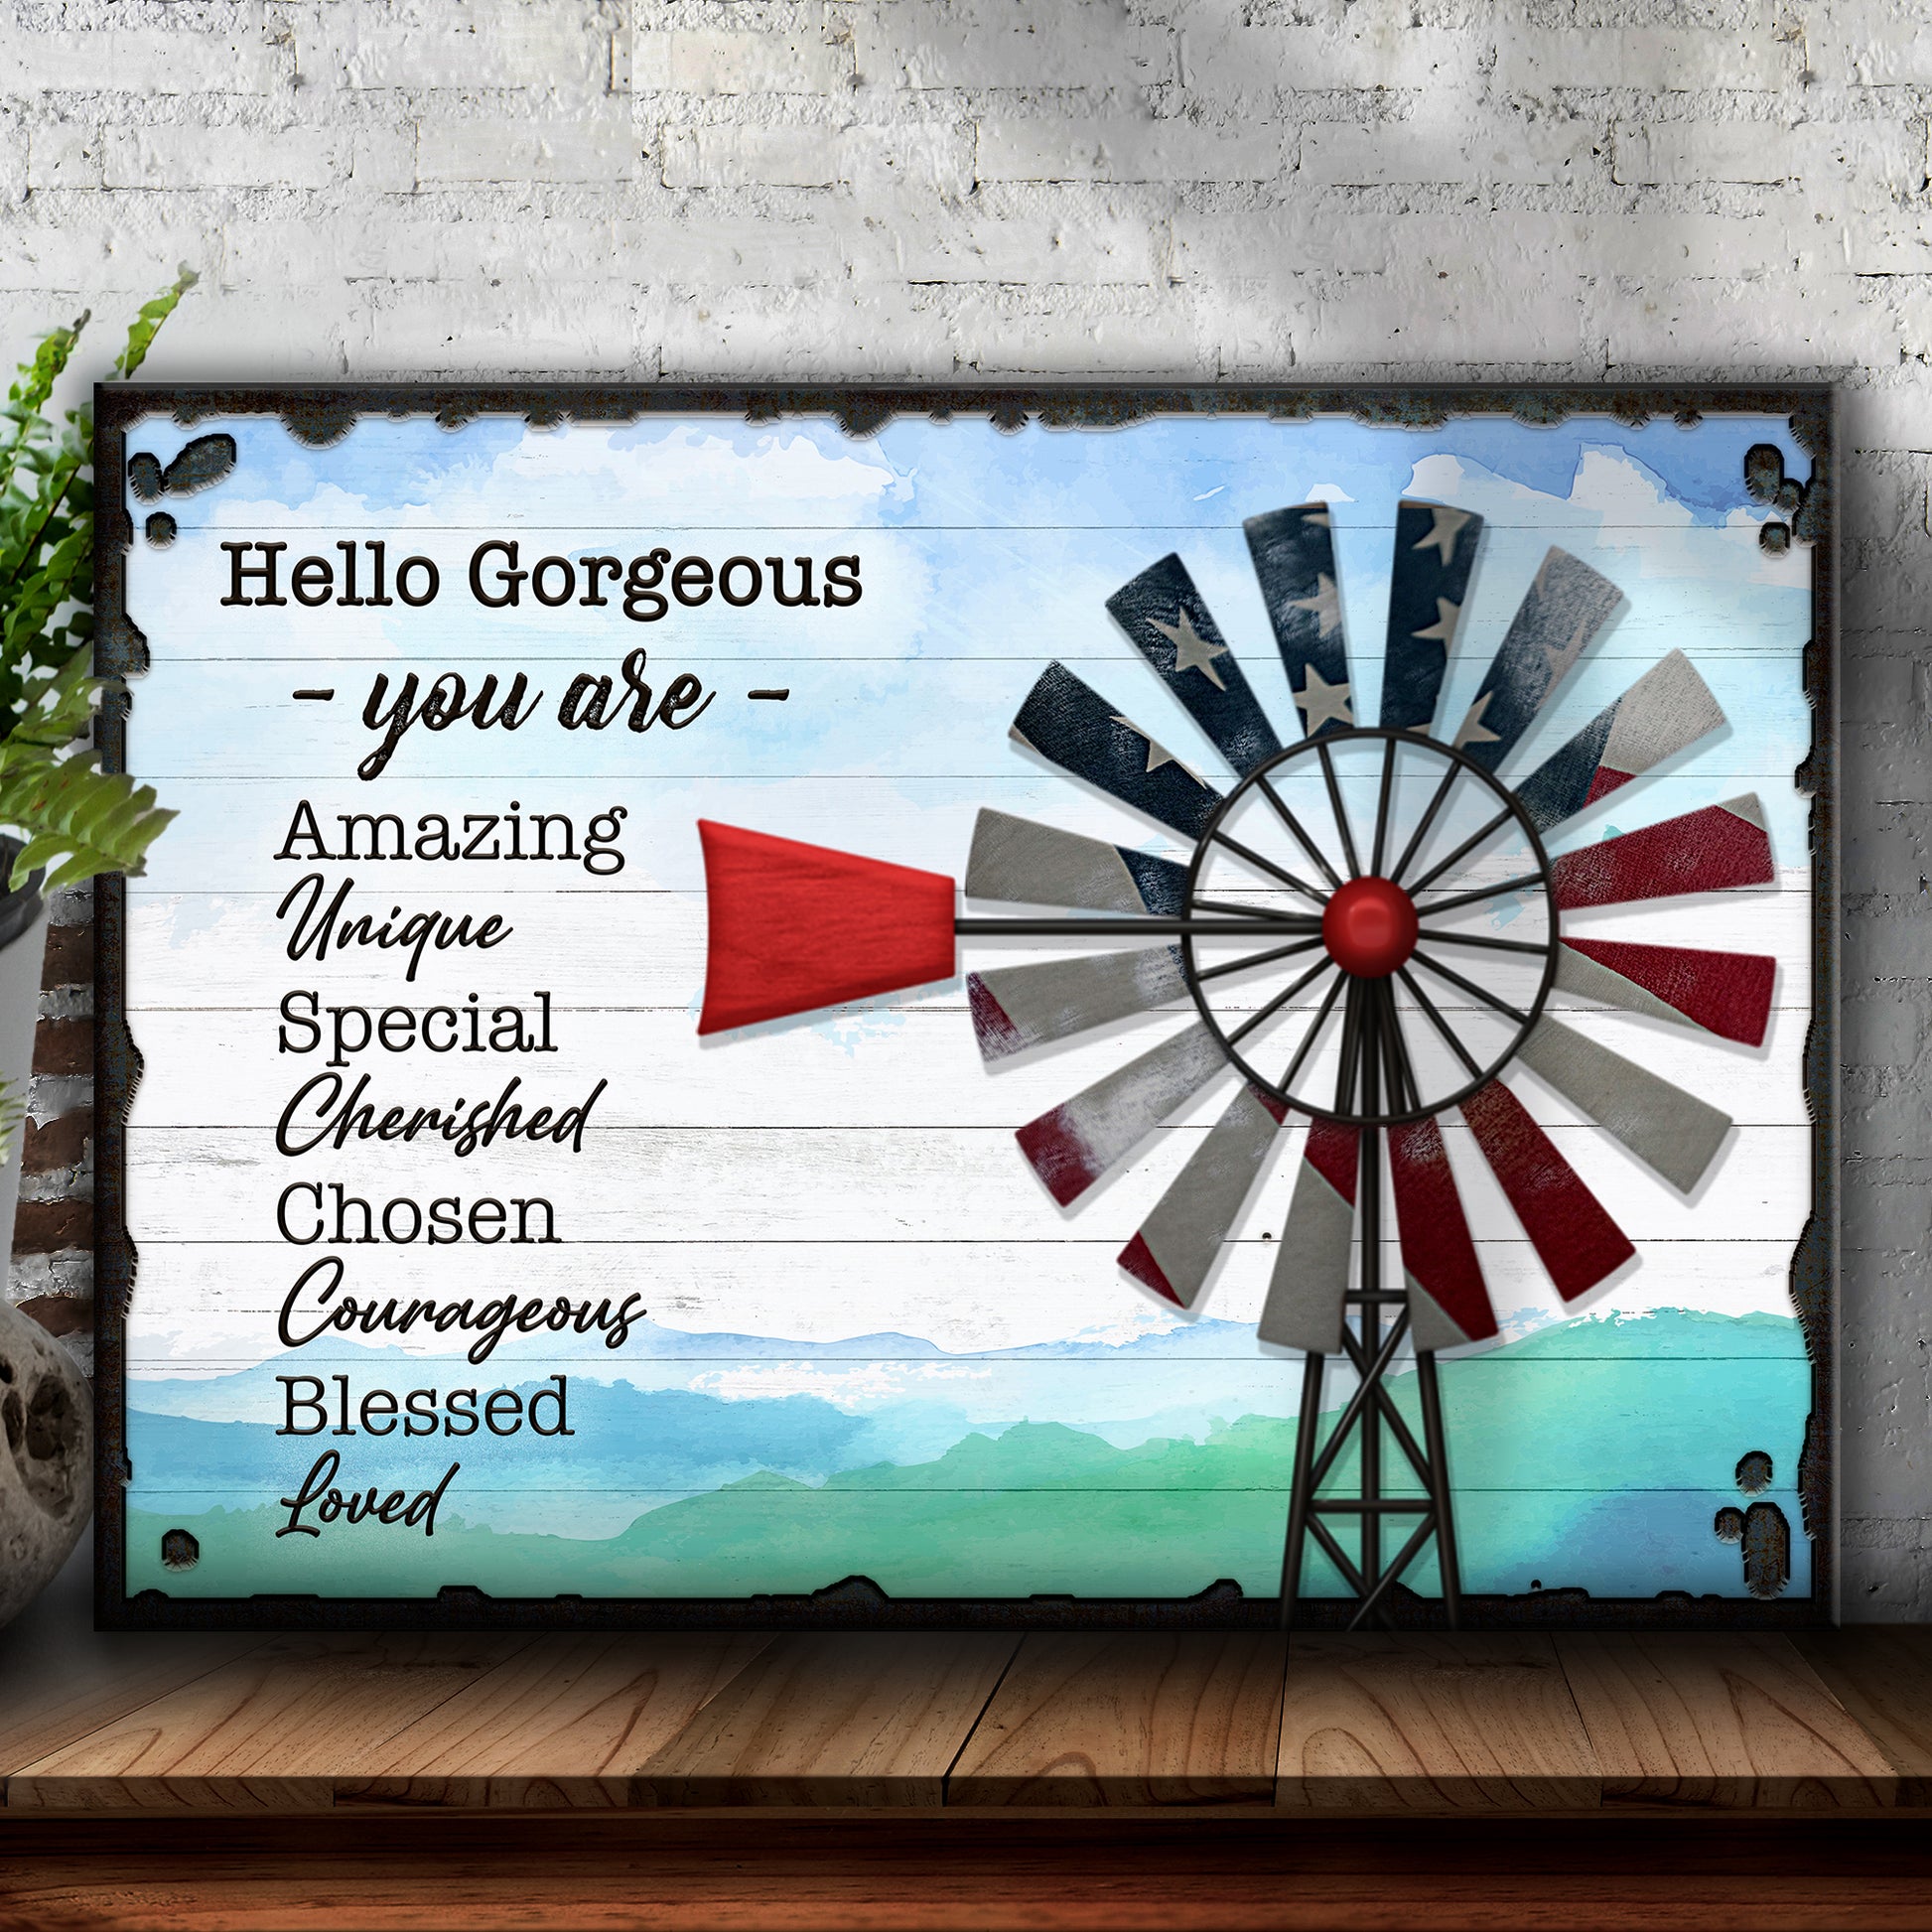 Hello Gorgeous Sign Style 1 - Image by Tailored Canvases